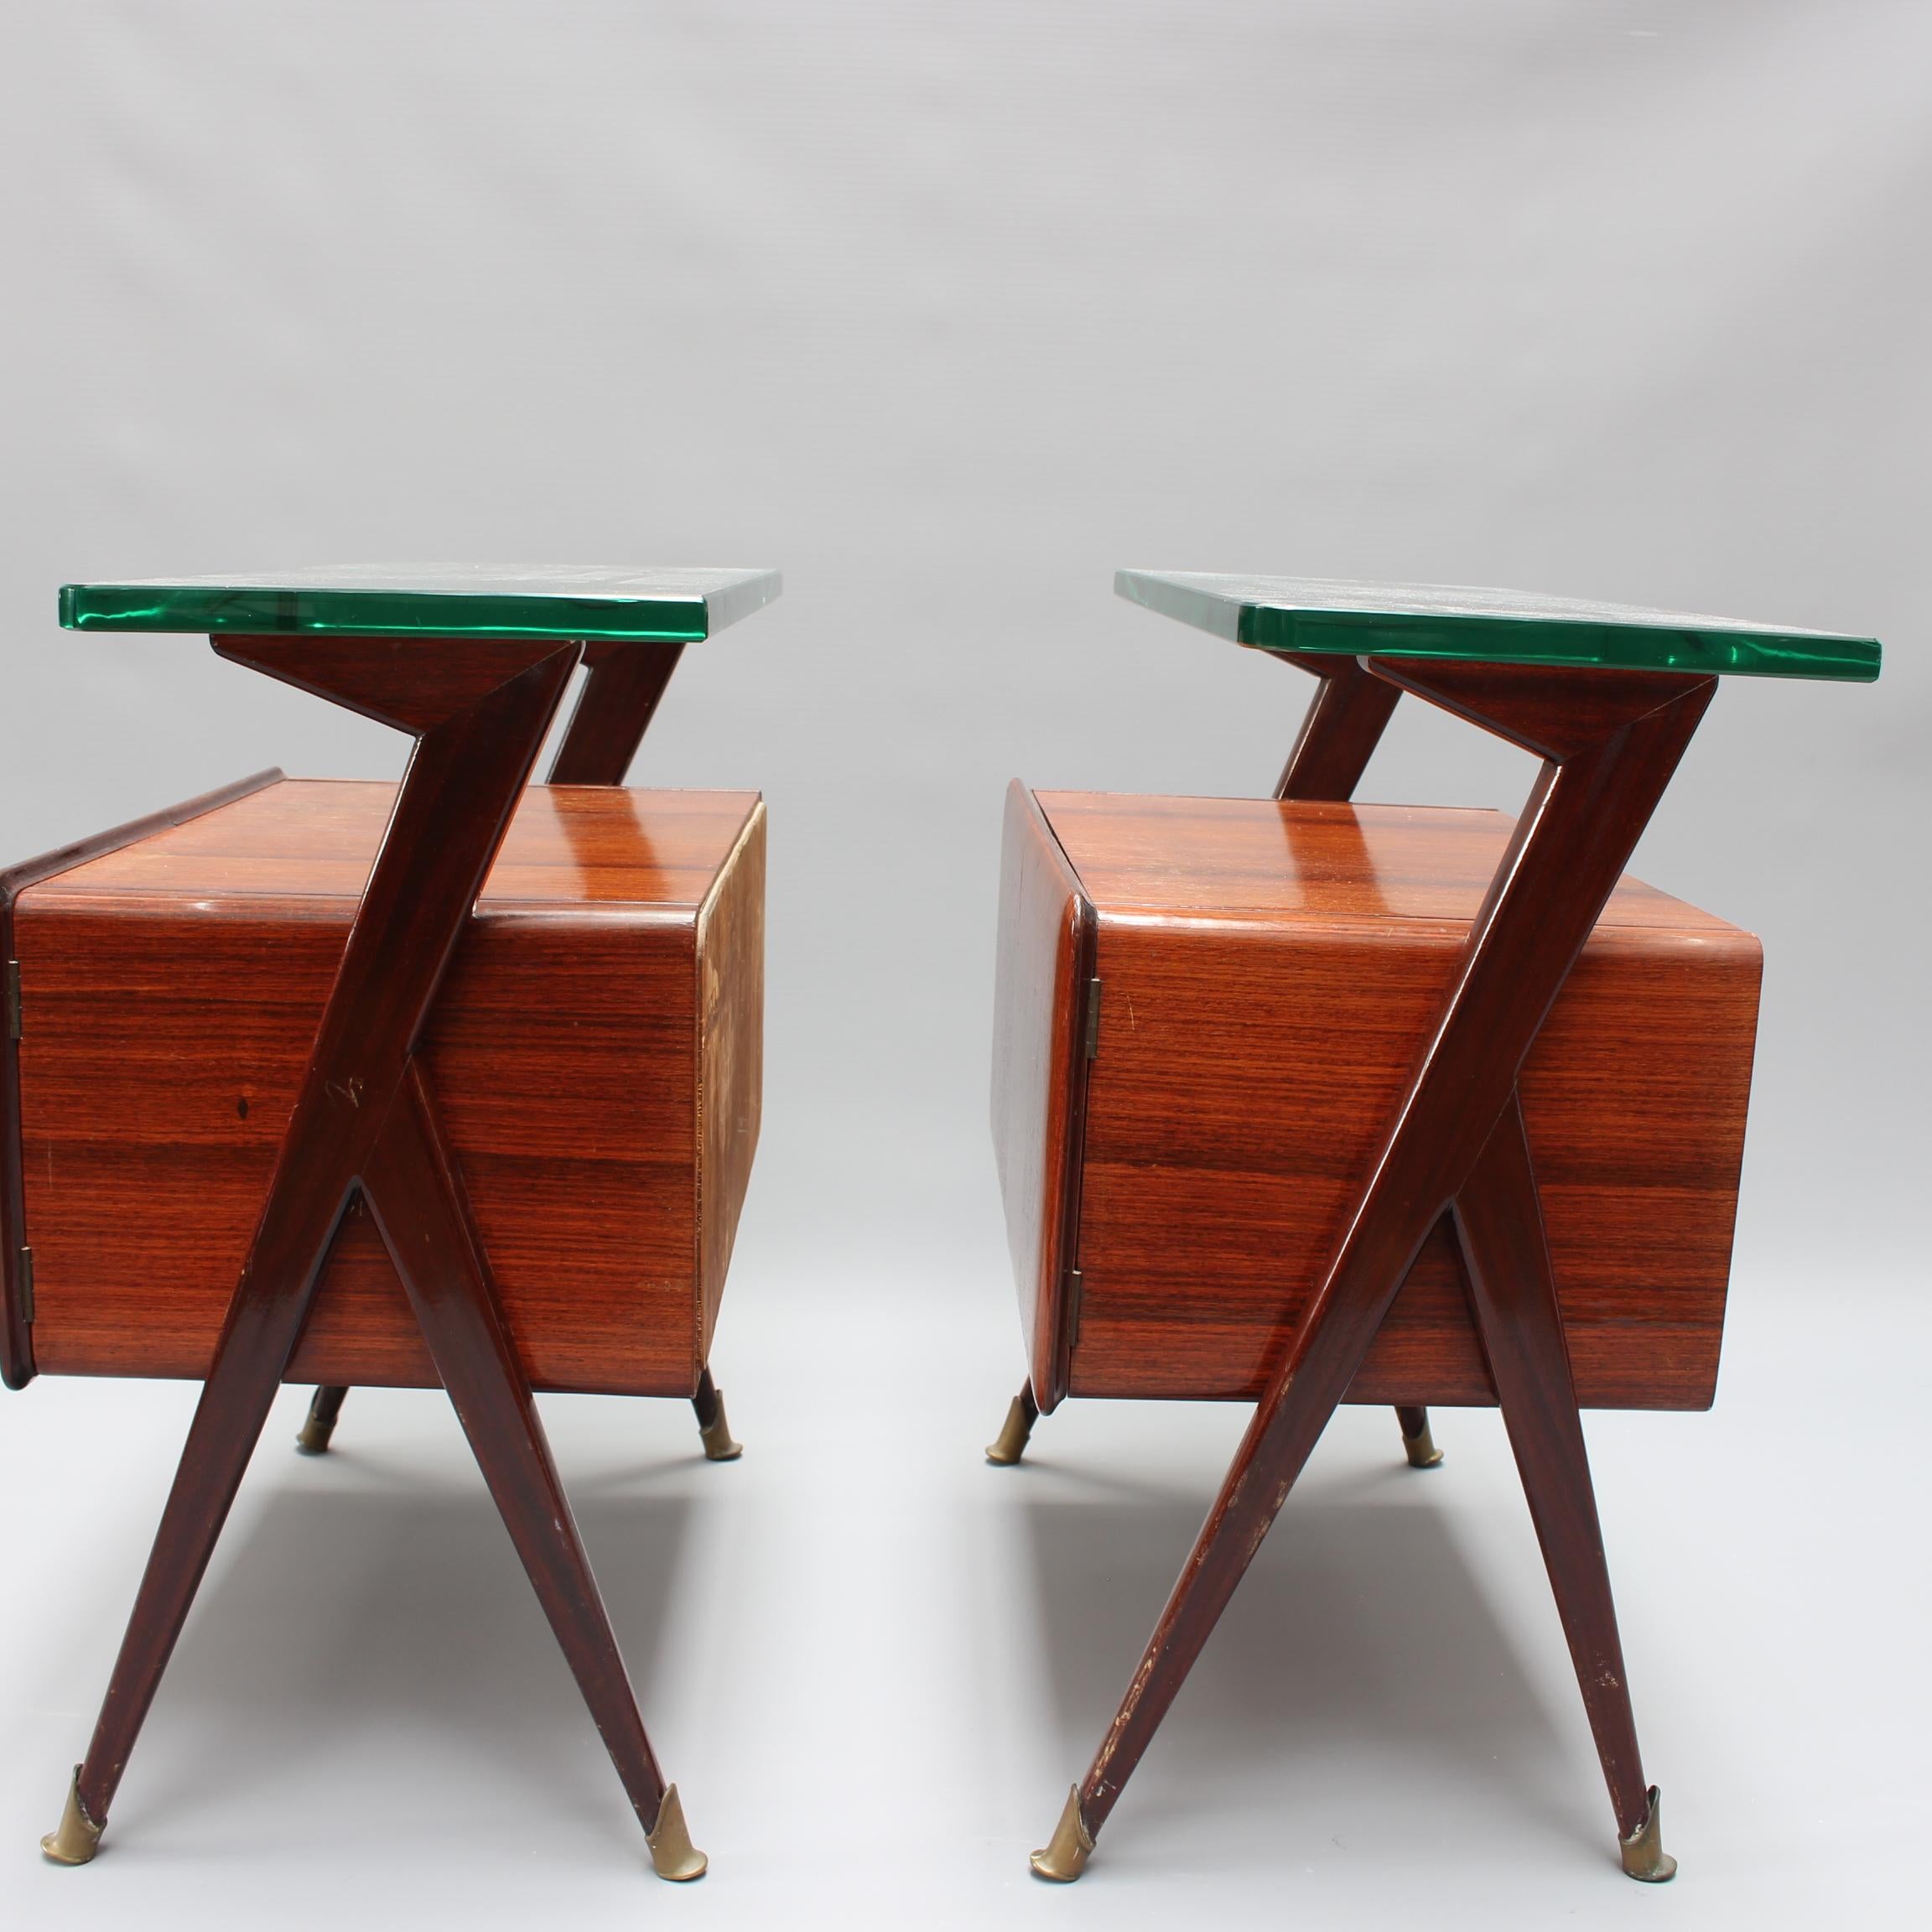 Pair of Vintage Italian Bedside Tables Attributed to Silvio Cavatorta  For Sale 1